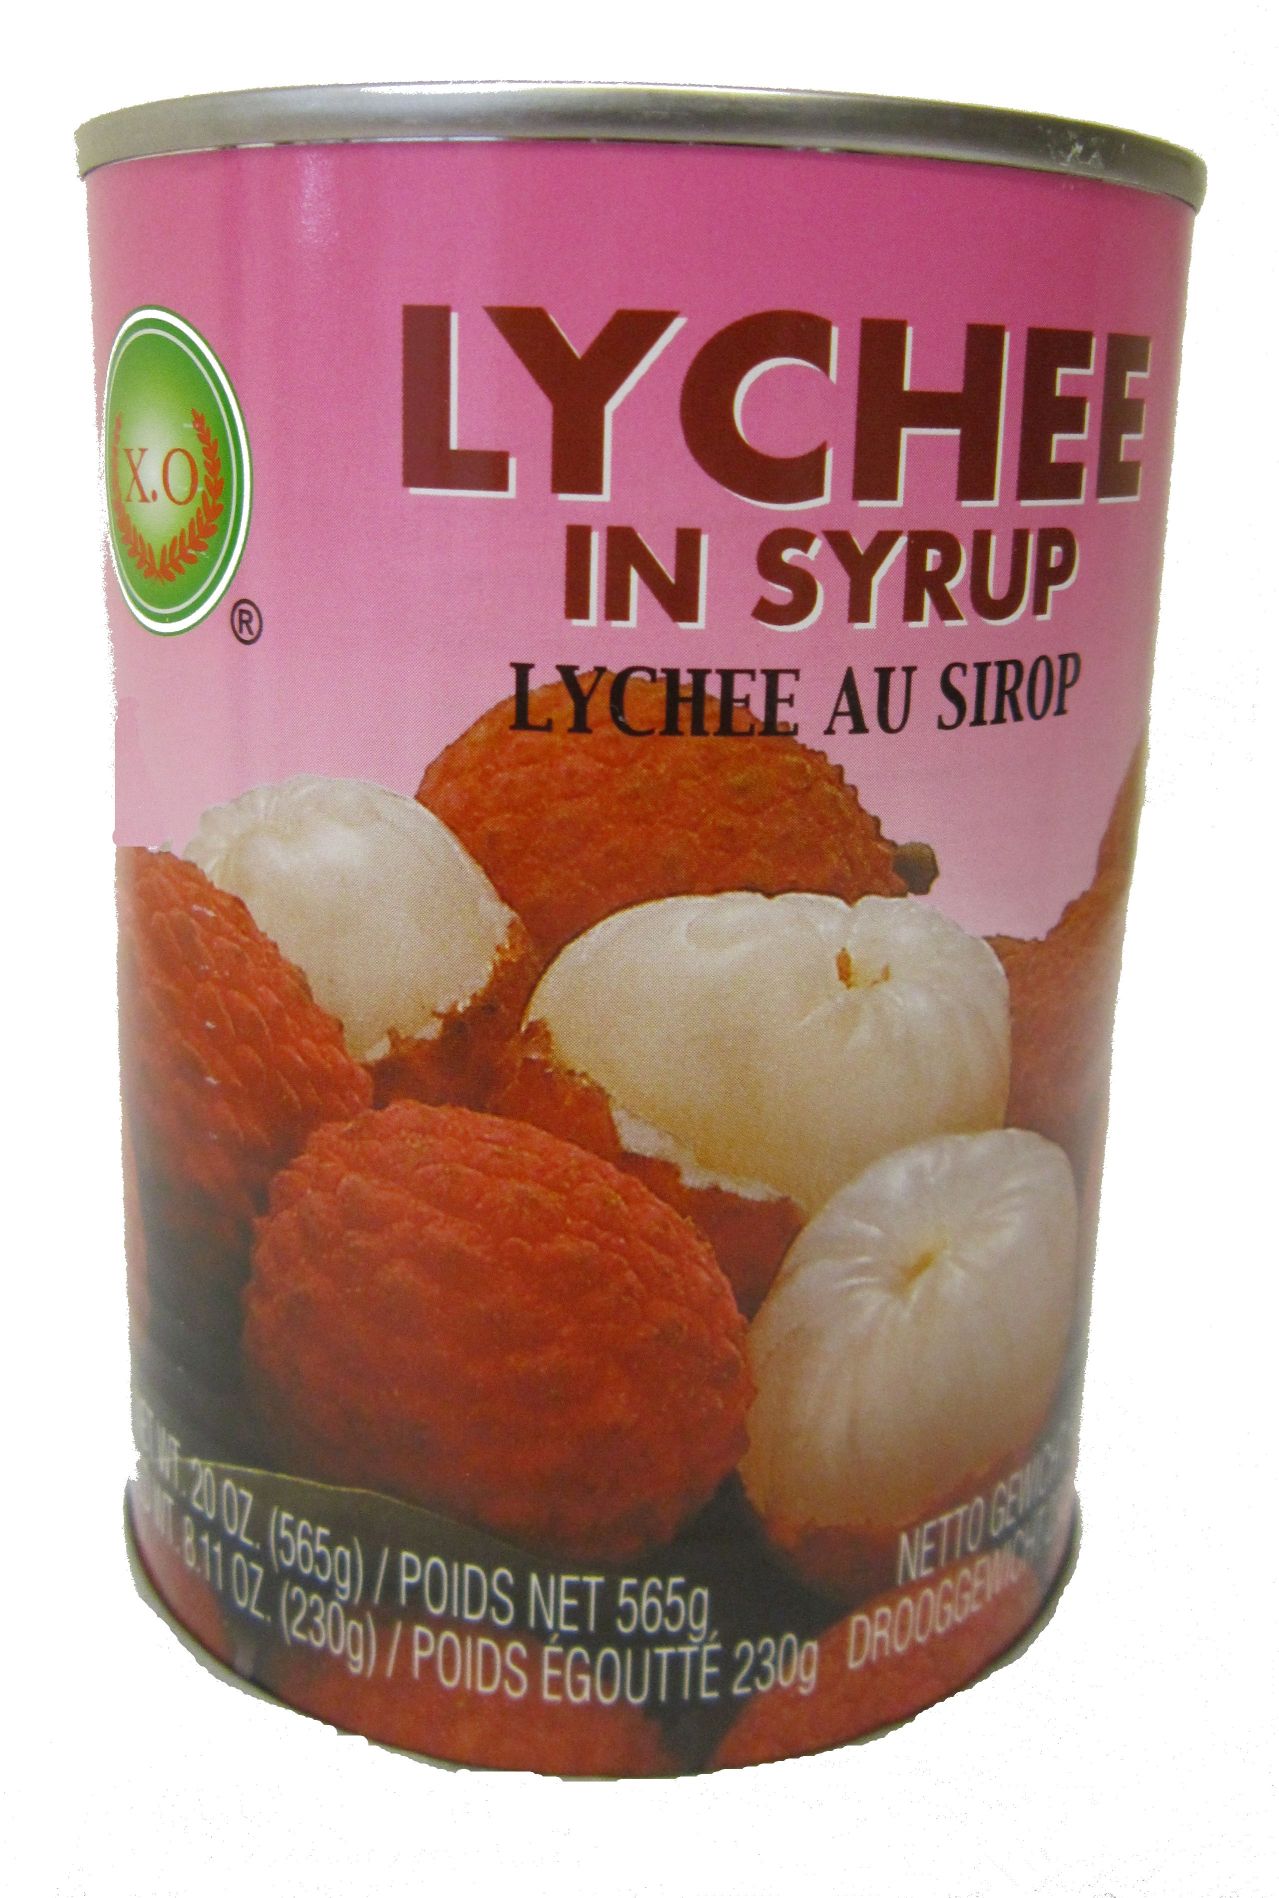 X.O Lychee in Syrup Image